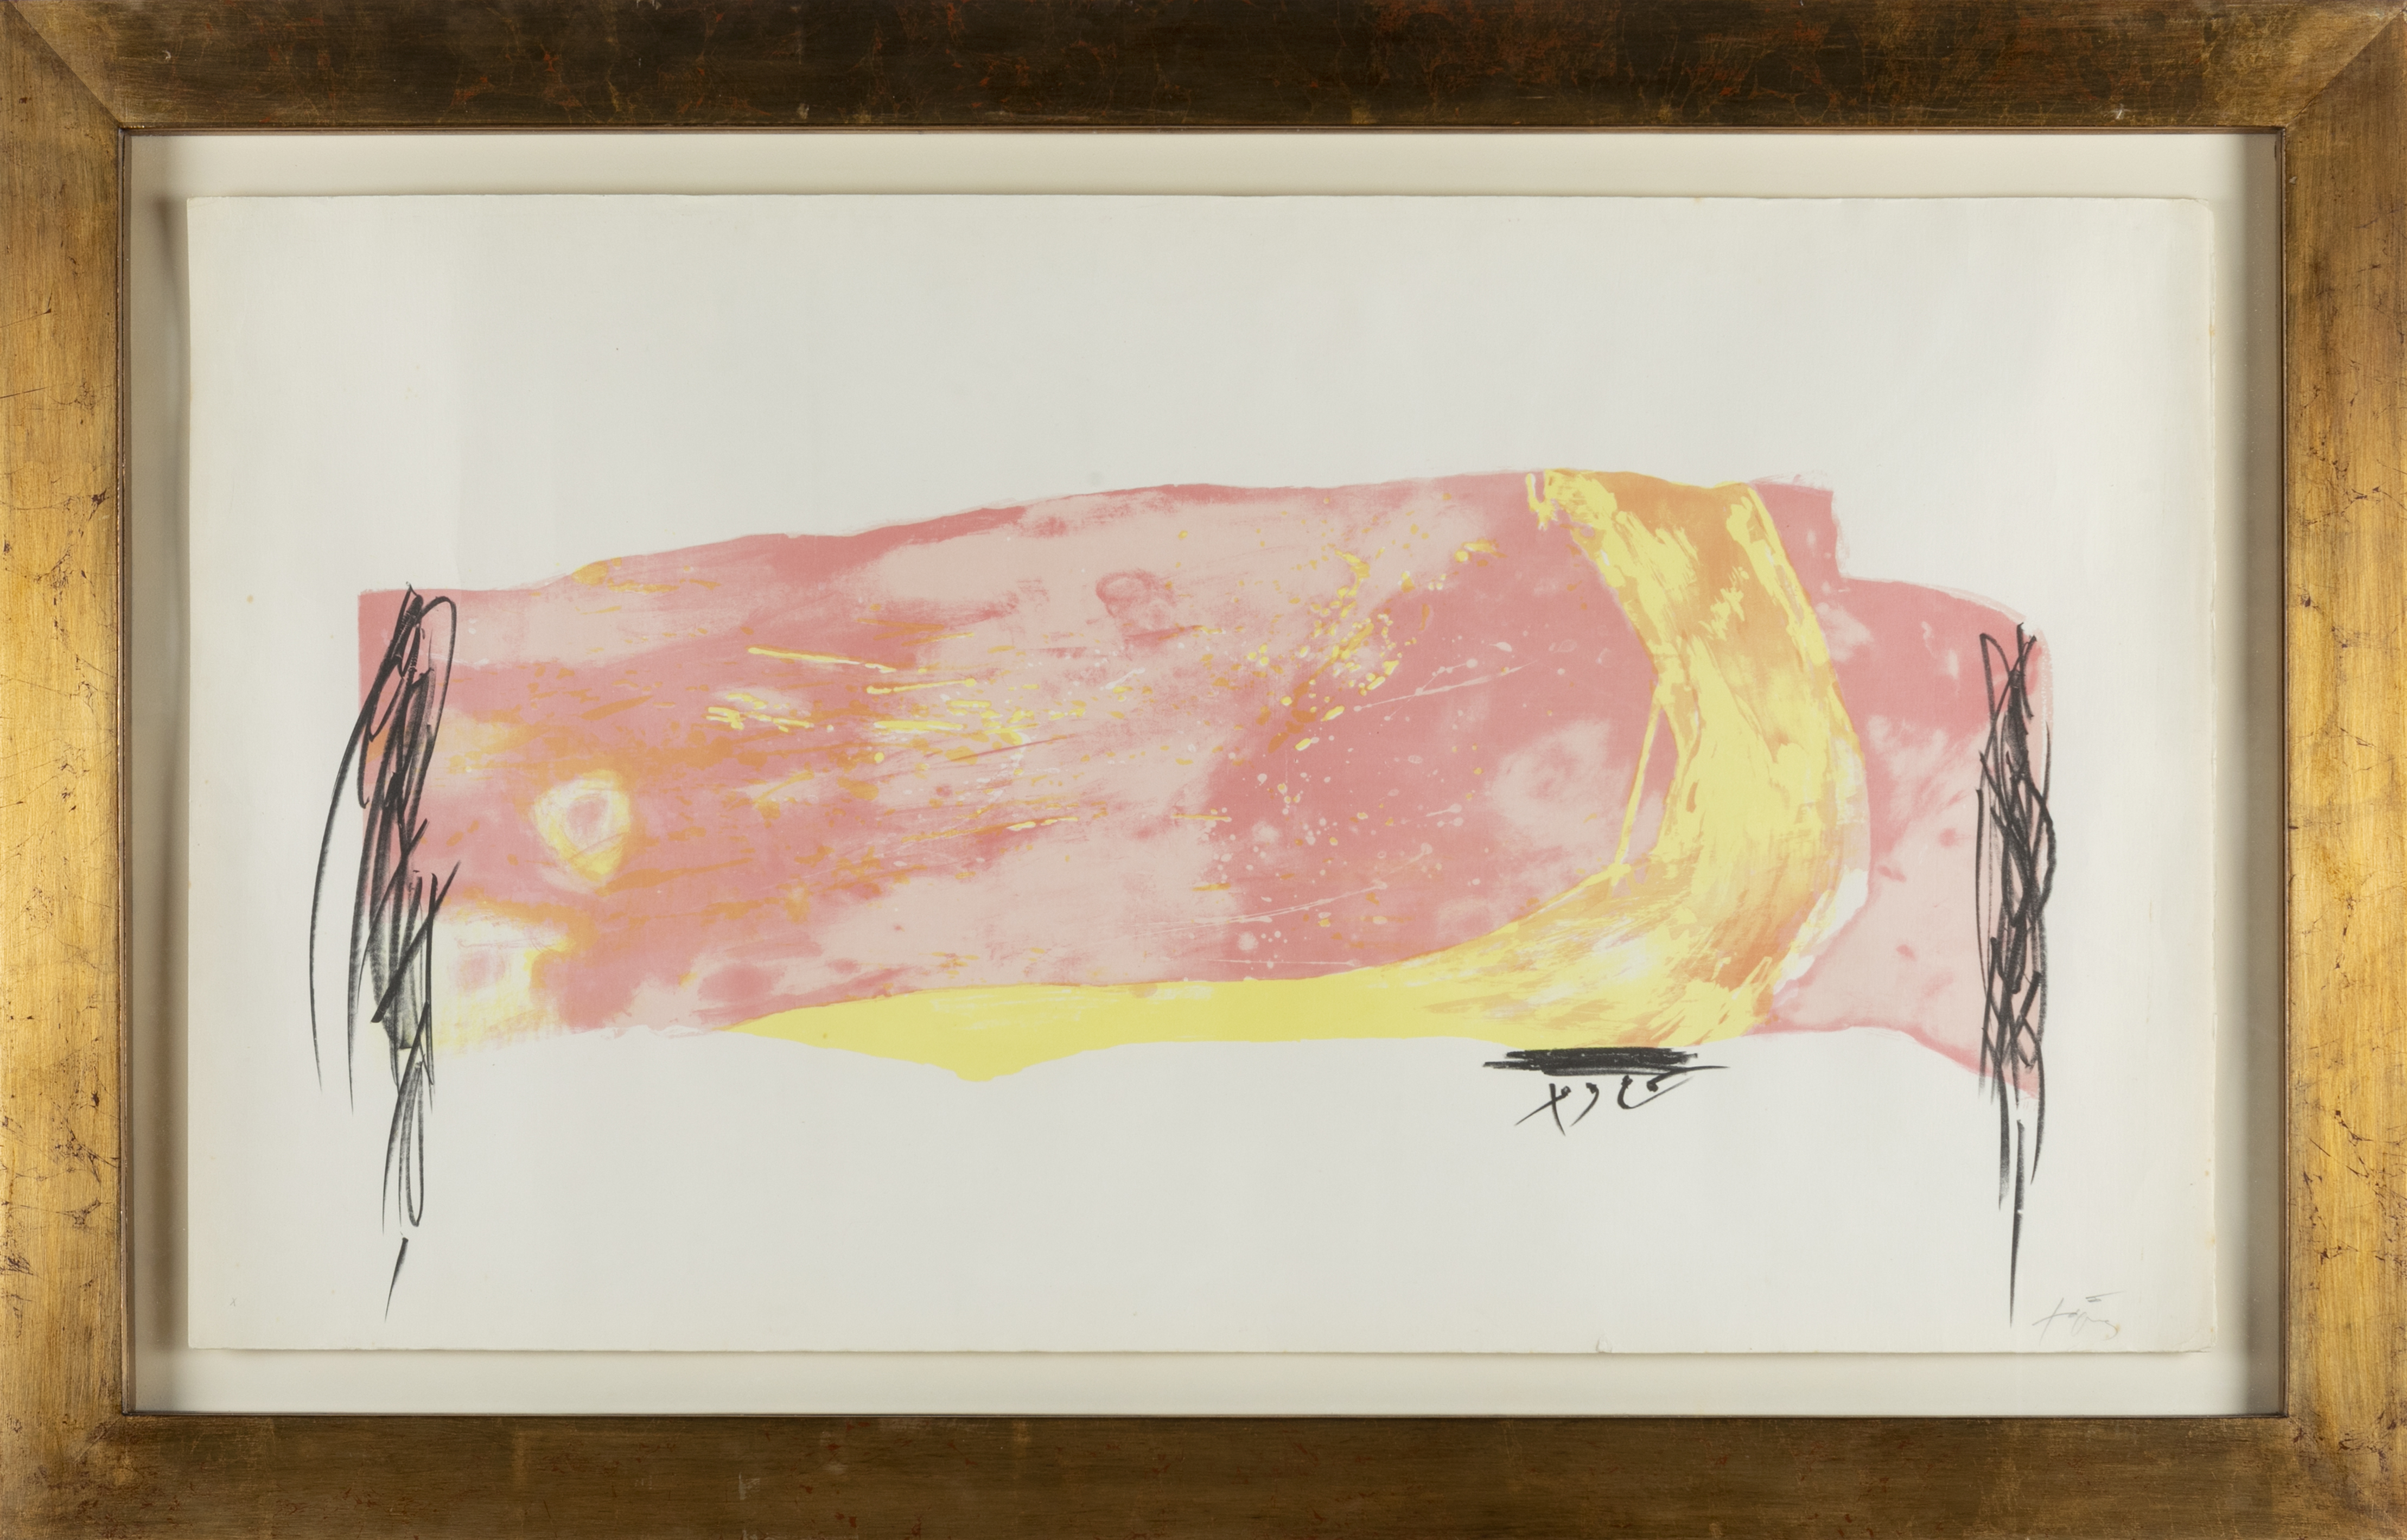 ANTONI TÀPIES PUIG (Barcelona, 1923-2012). Untitled, part of the series "Nocturn Matinal", 1970. - Image 4 of 9